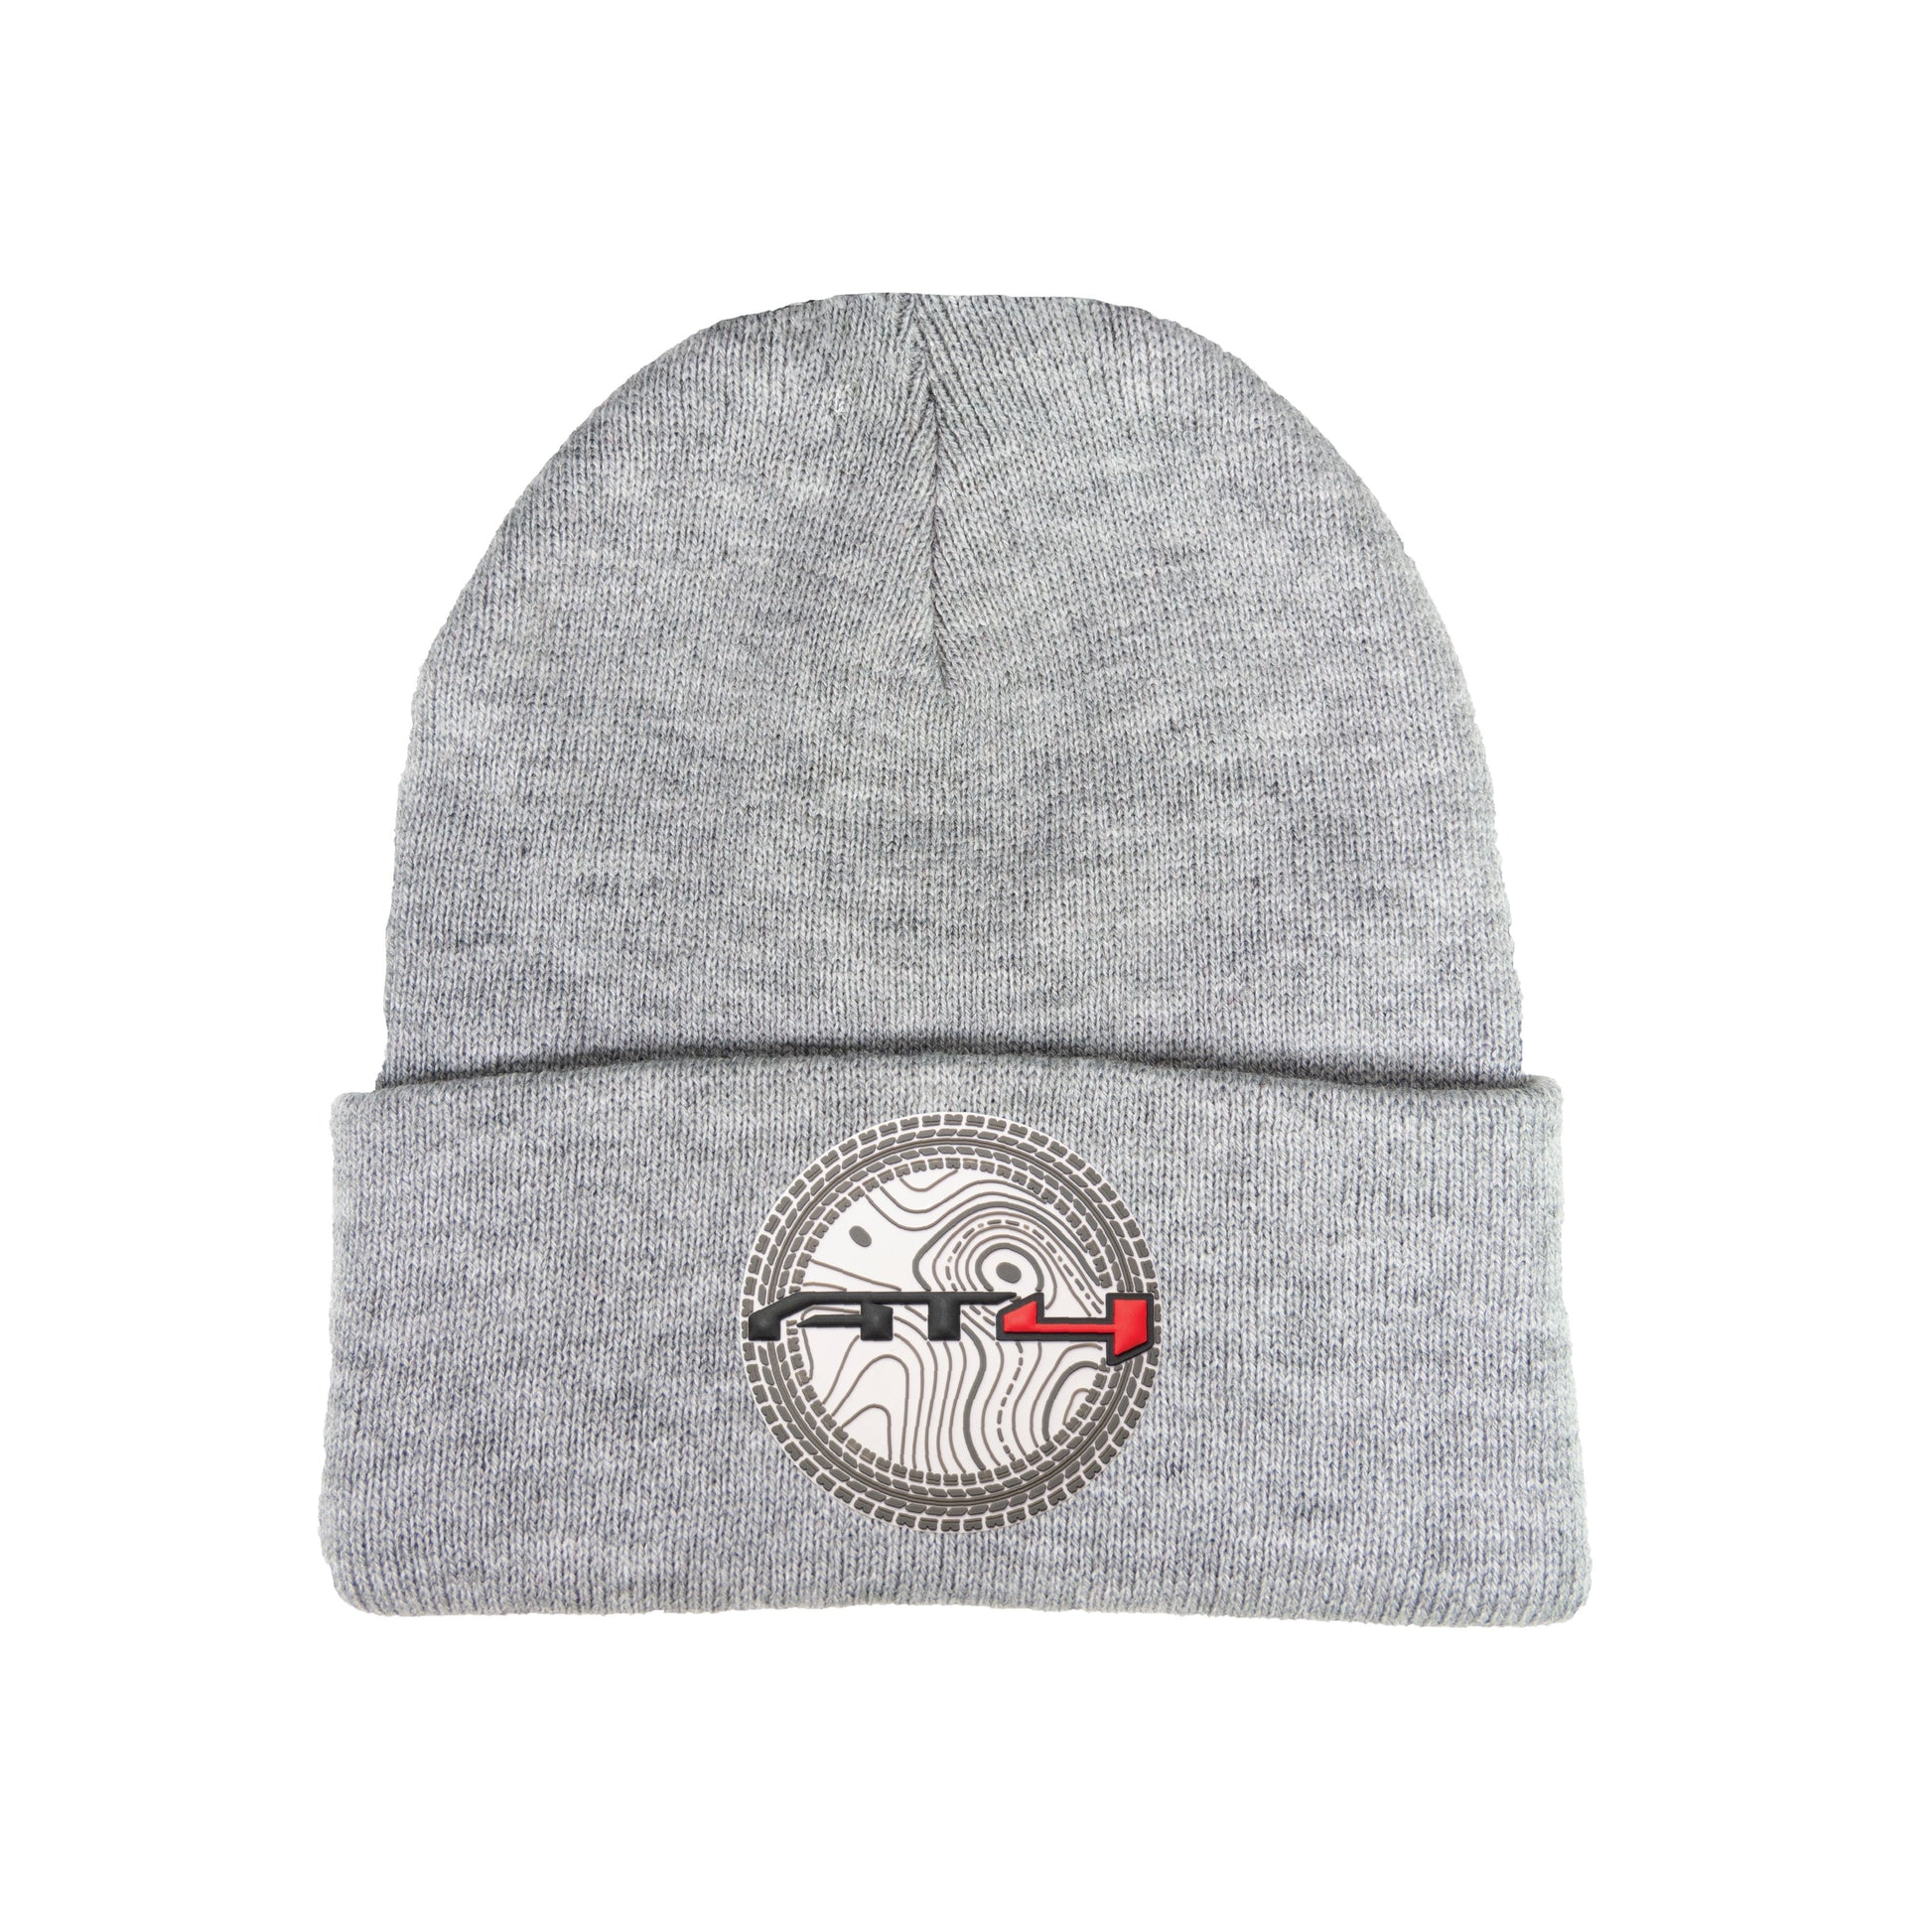 AT4 12 in Knit Beanie- Heather Grey - Ten Gallon Hat Co.